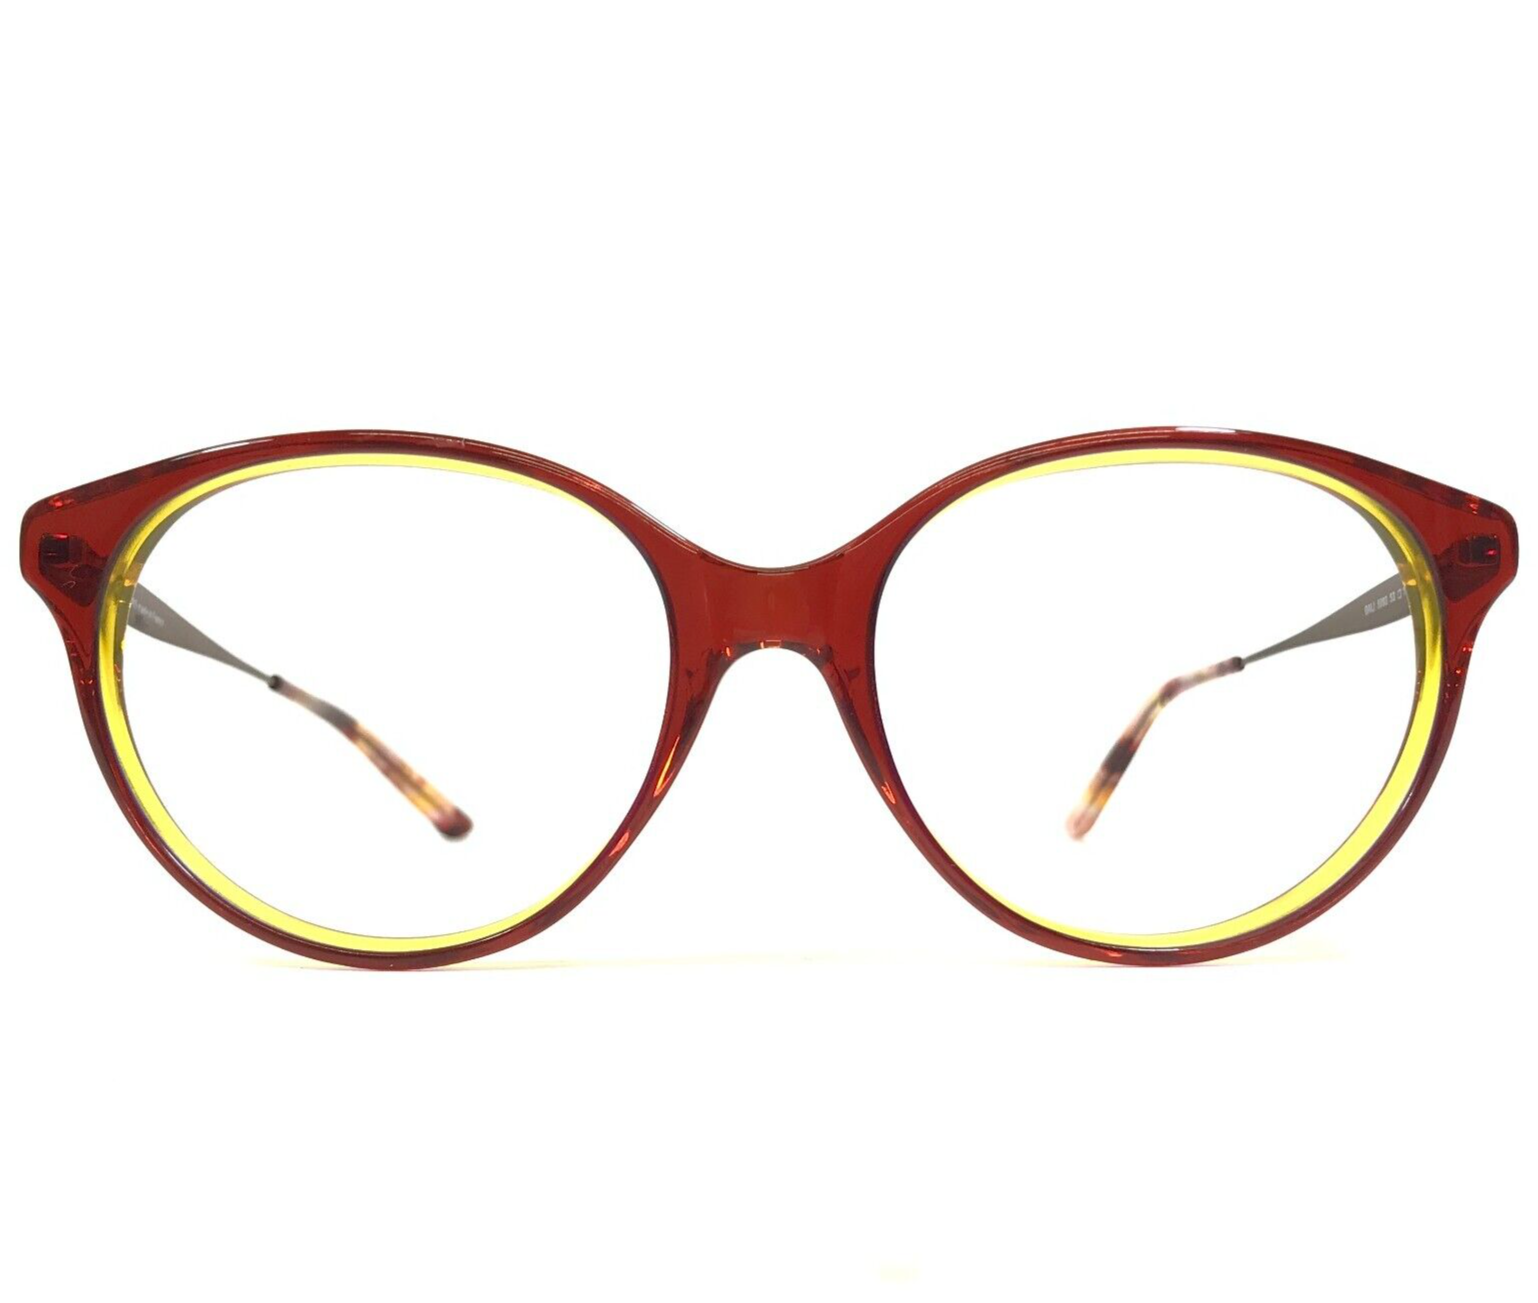 Primary image for Jean Lafont Eyeglasses Frames BALI 5093 Clear Shiny Yellow Red Brown 53-17-138